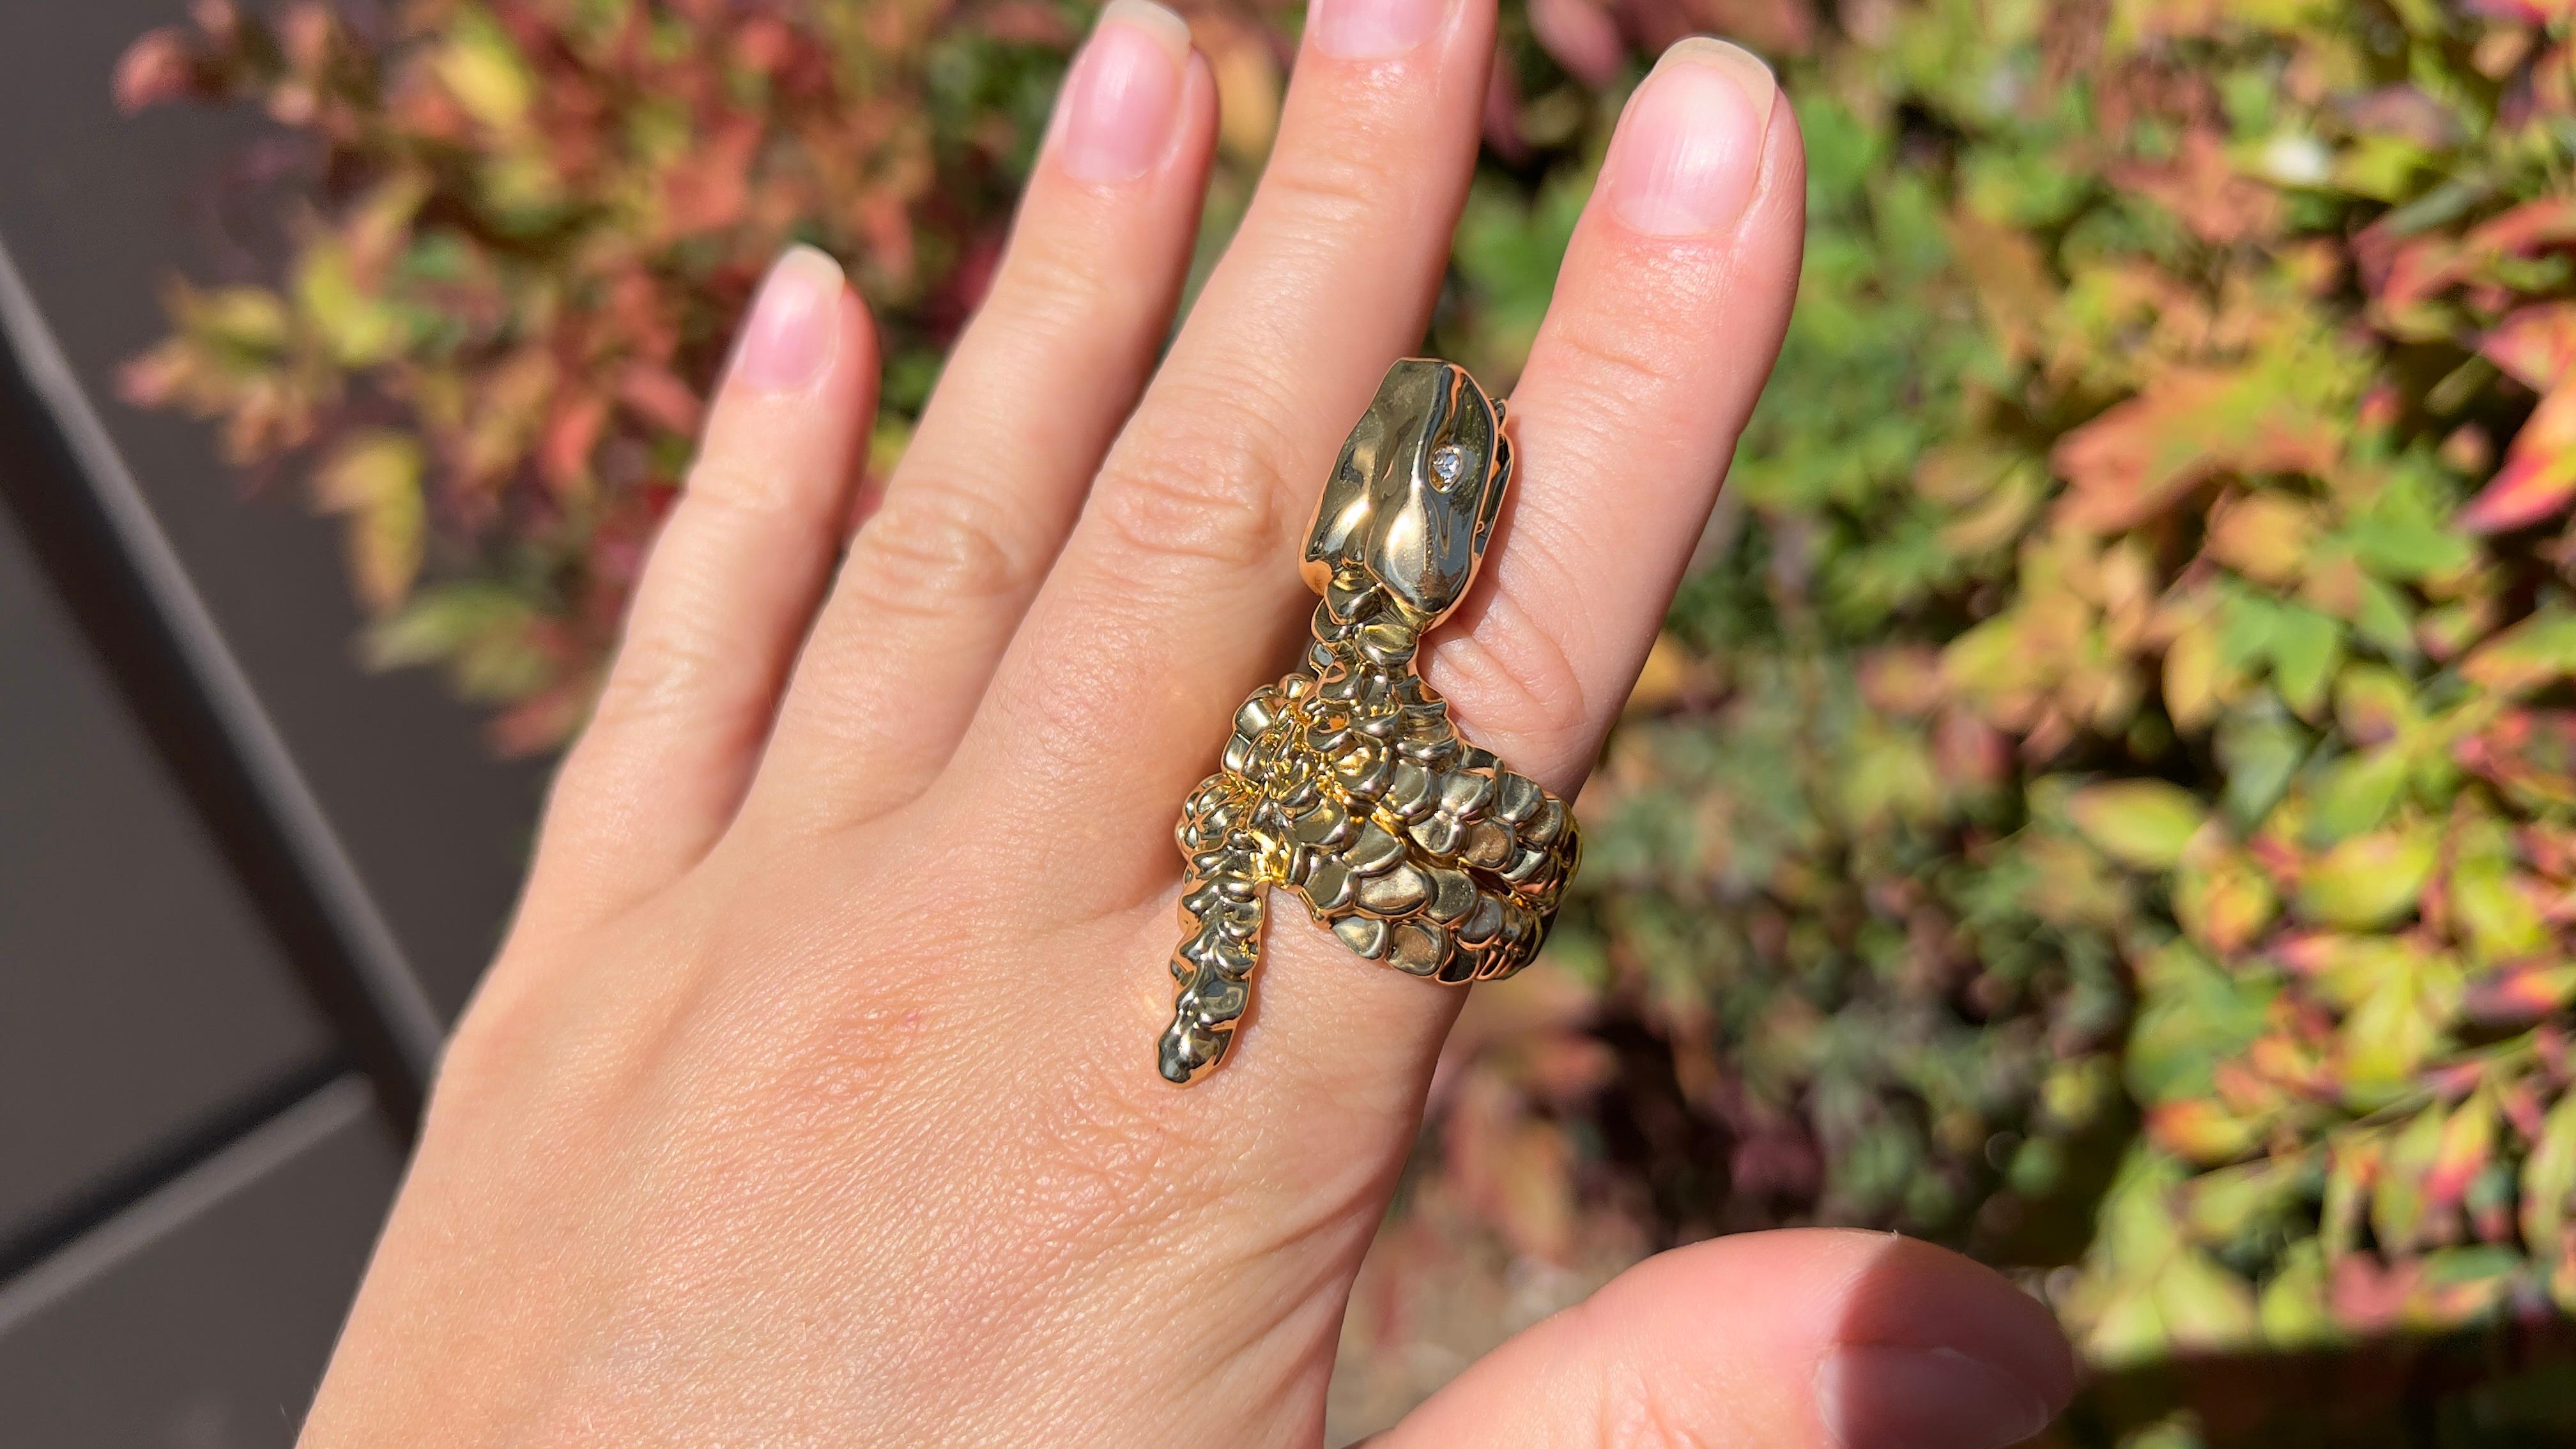 Snake 18K Gold Plated Ring Encrusted With White Topaz
18k Gold-Plated 
Adjustable Ring Size
Made in Italy
Weight: 17 g
Length of Snake: 2 inches